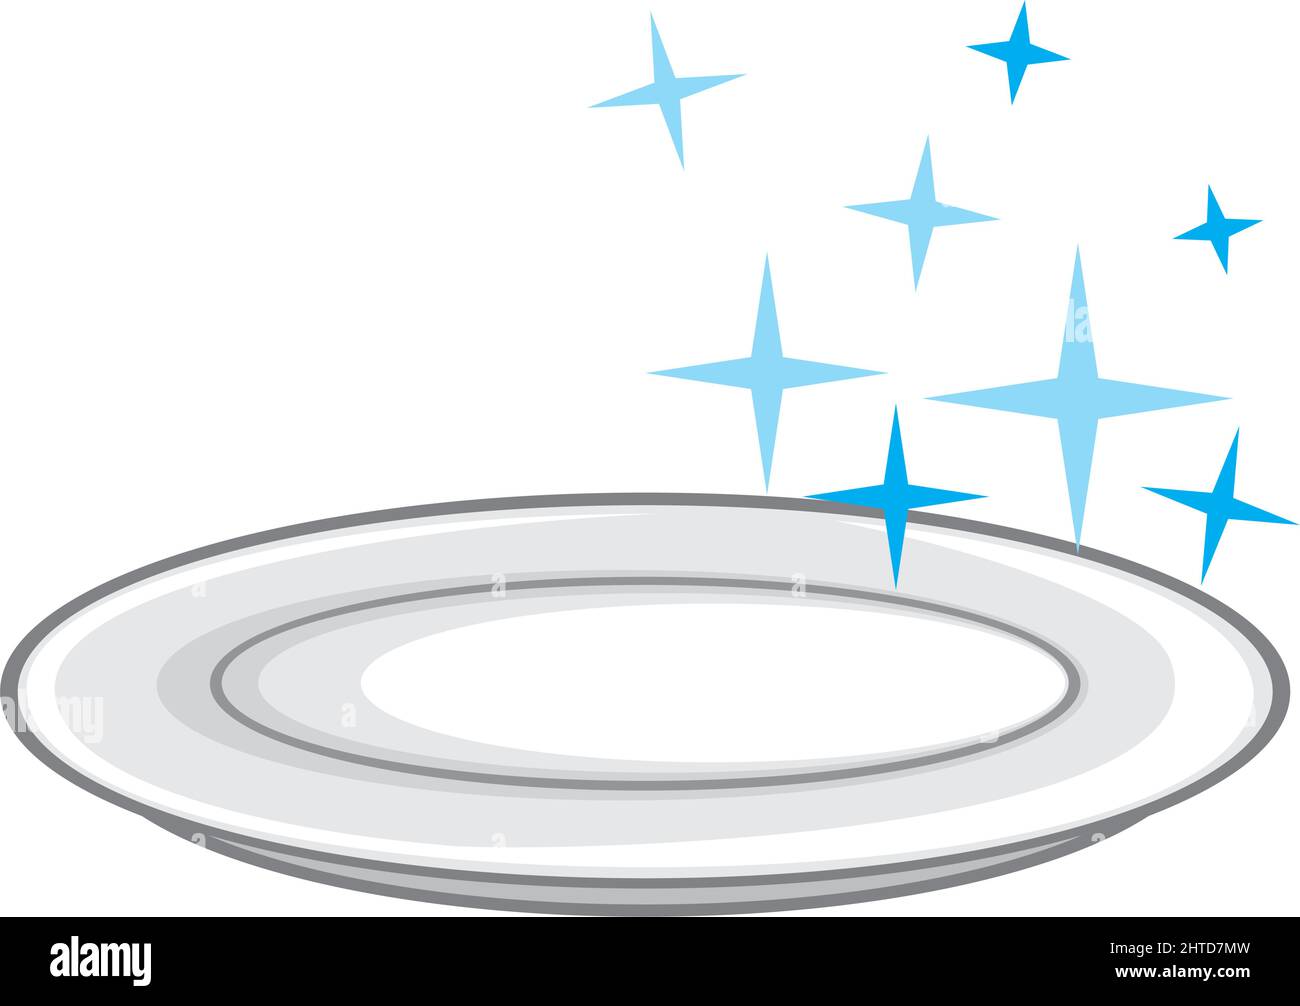 Clean plate (dish) vector illustration Stock Vector